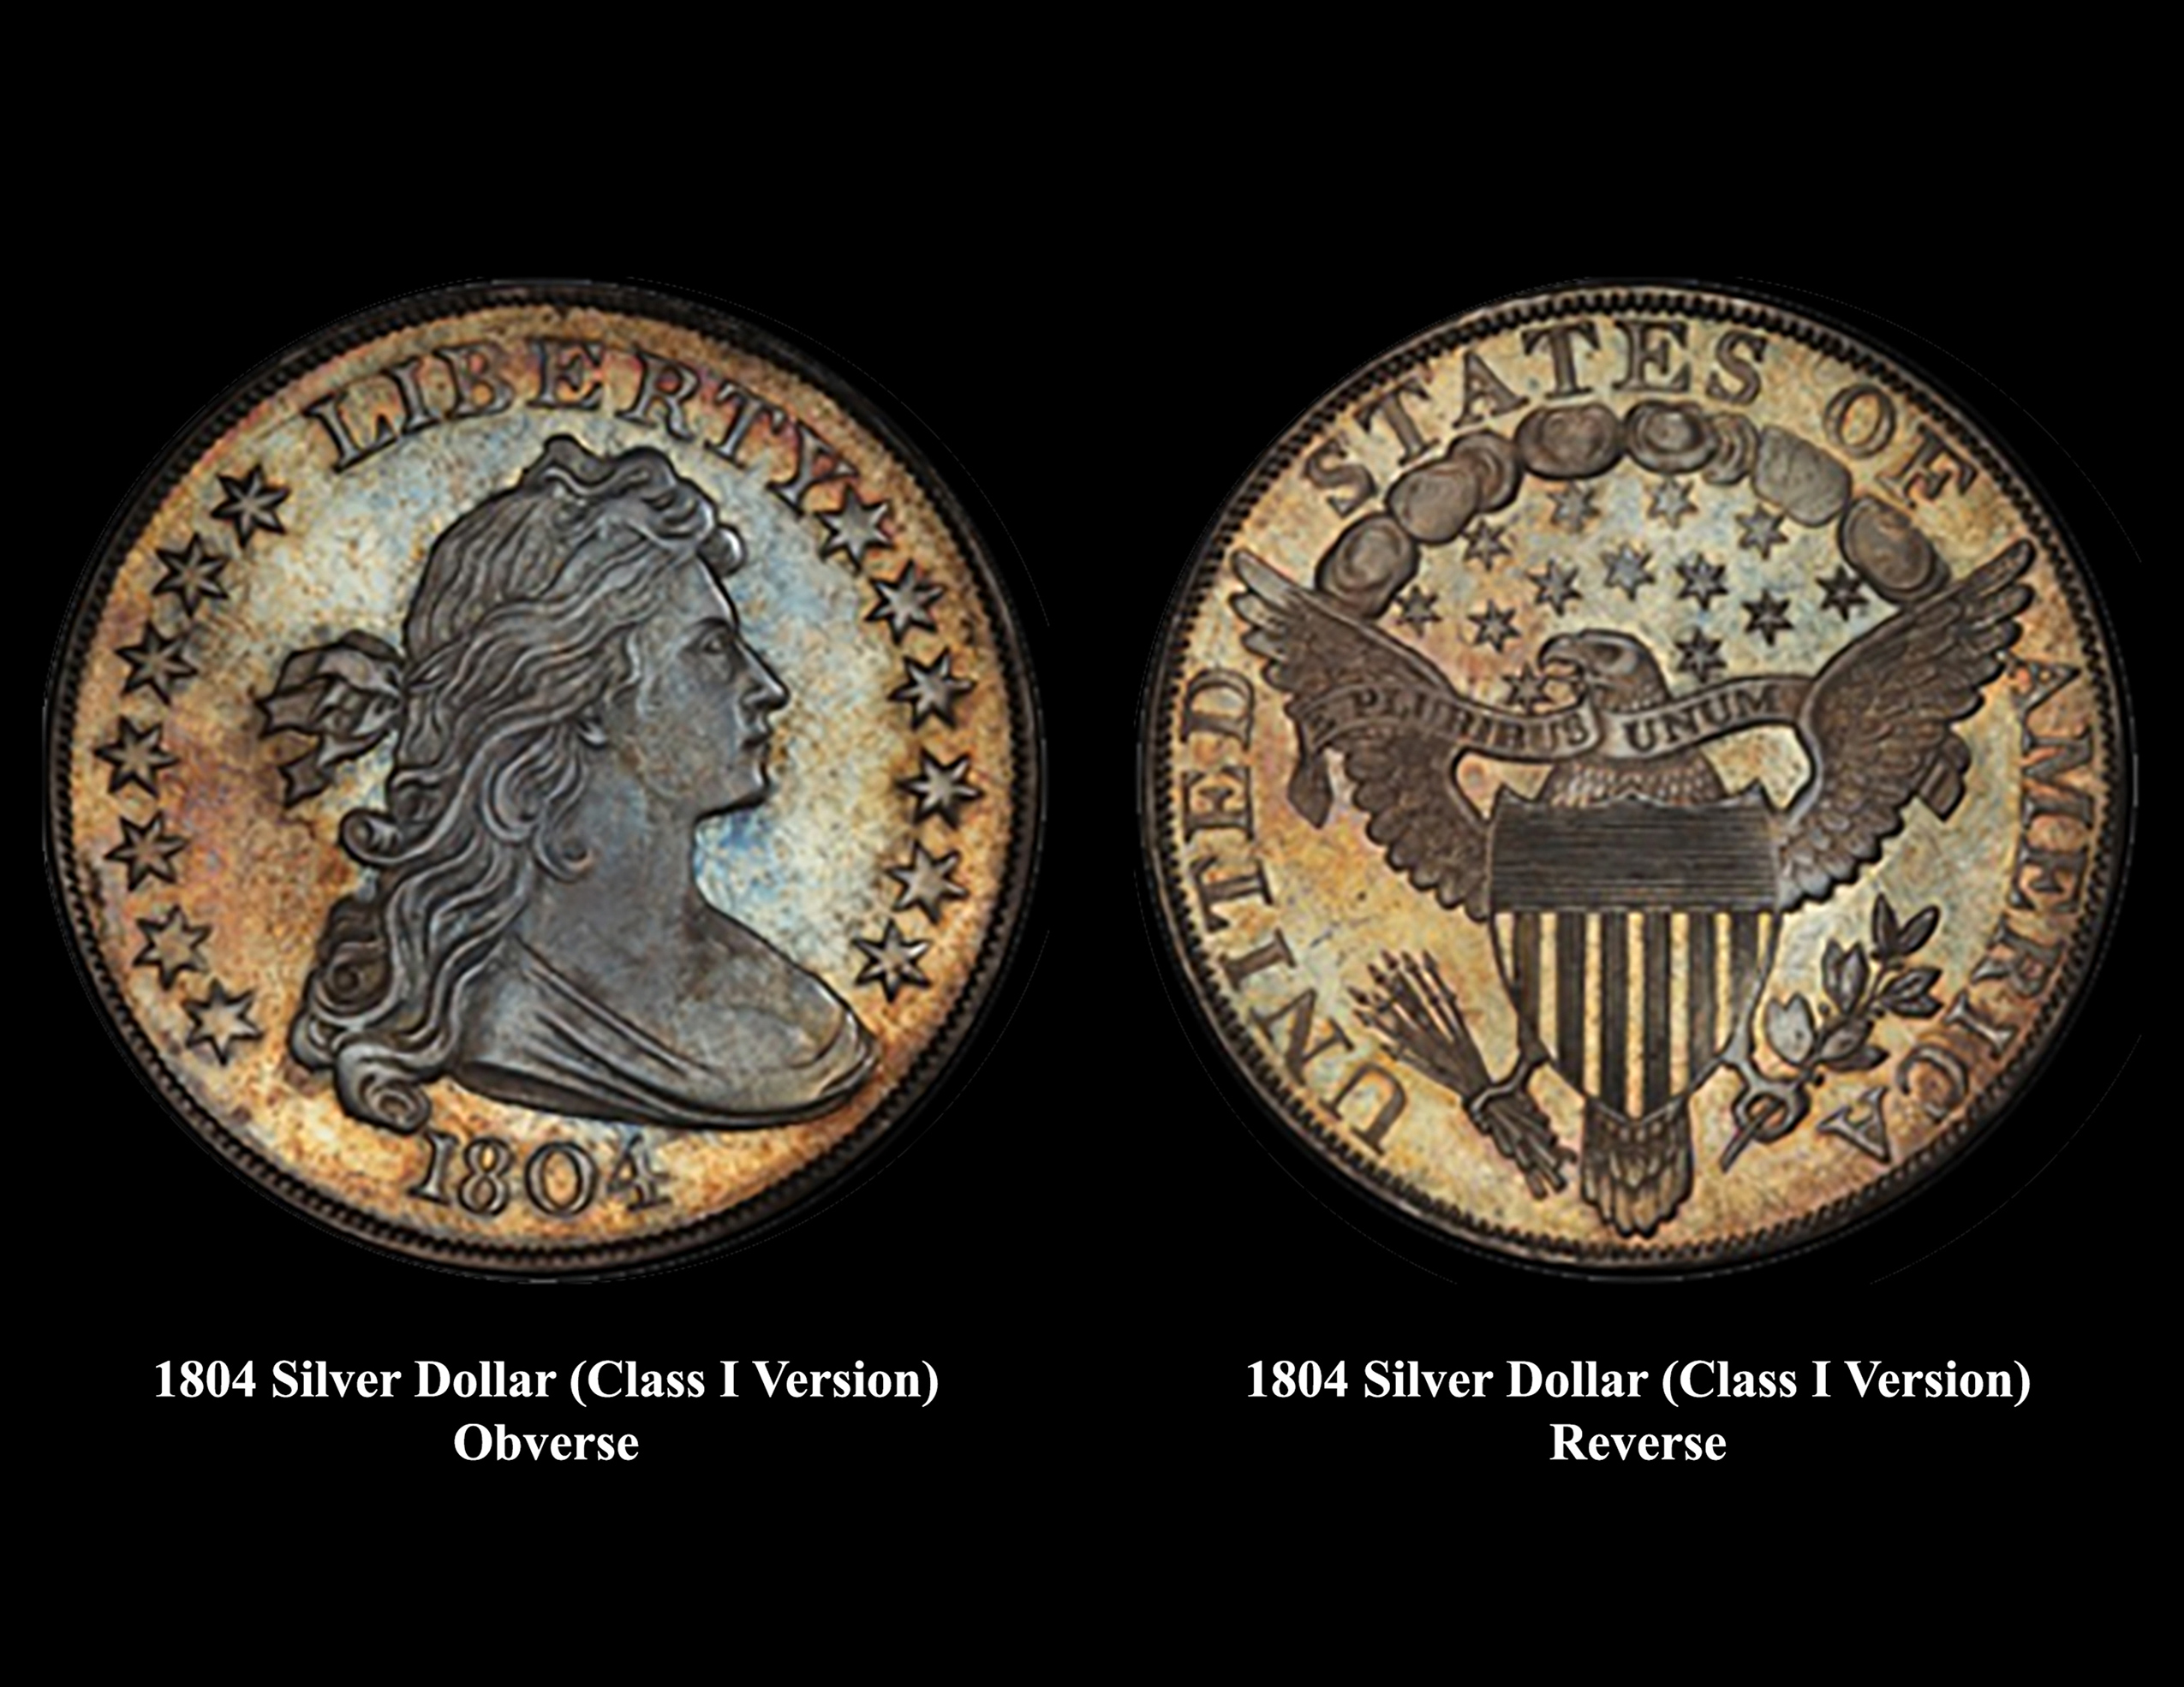 2026 Best of the Mint - 1804 Silver Dollar (Class I Version)